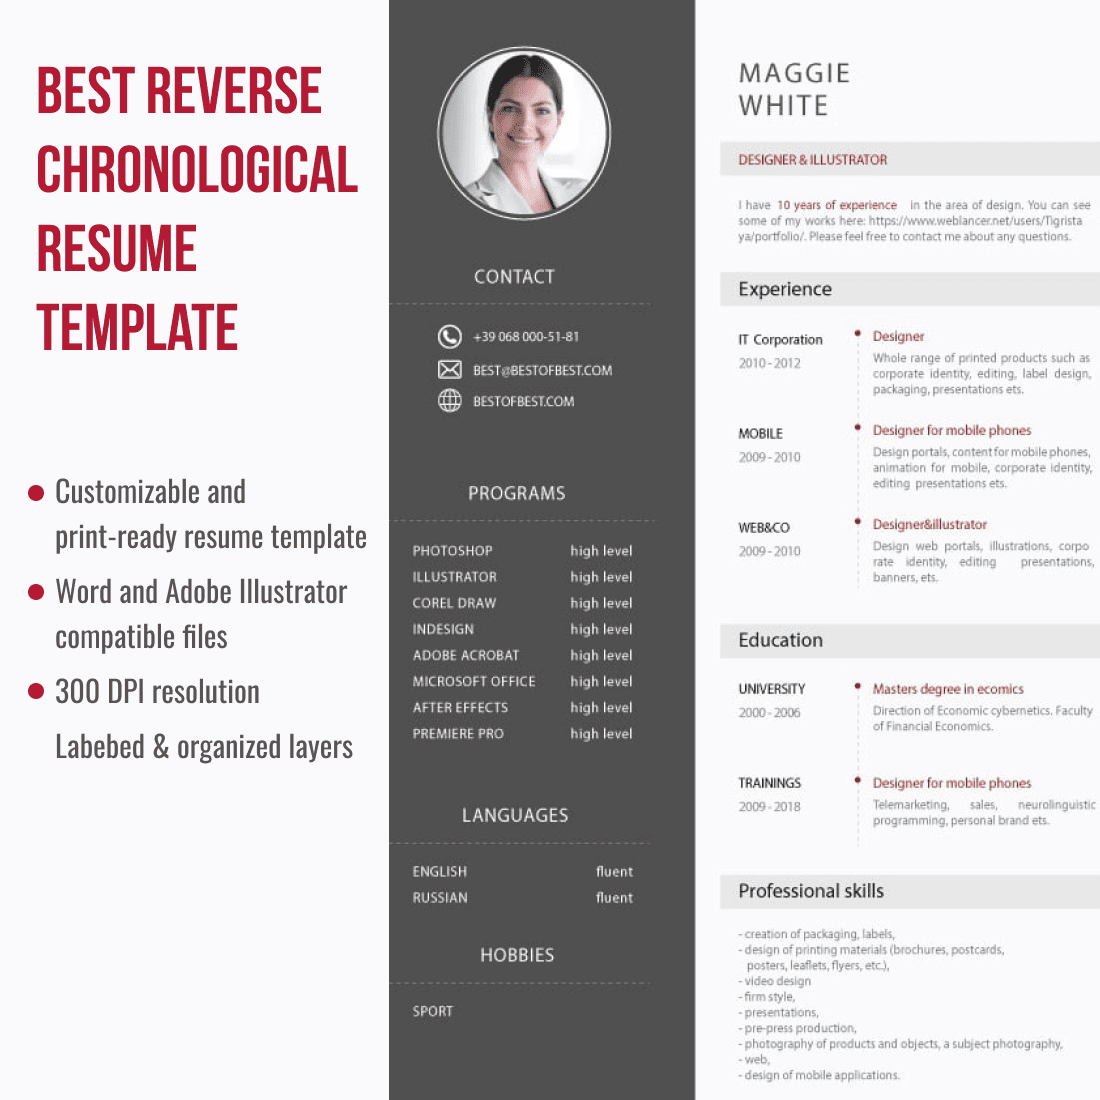 Professional resume template with a red and black color scheme.